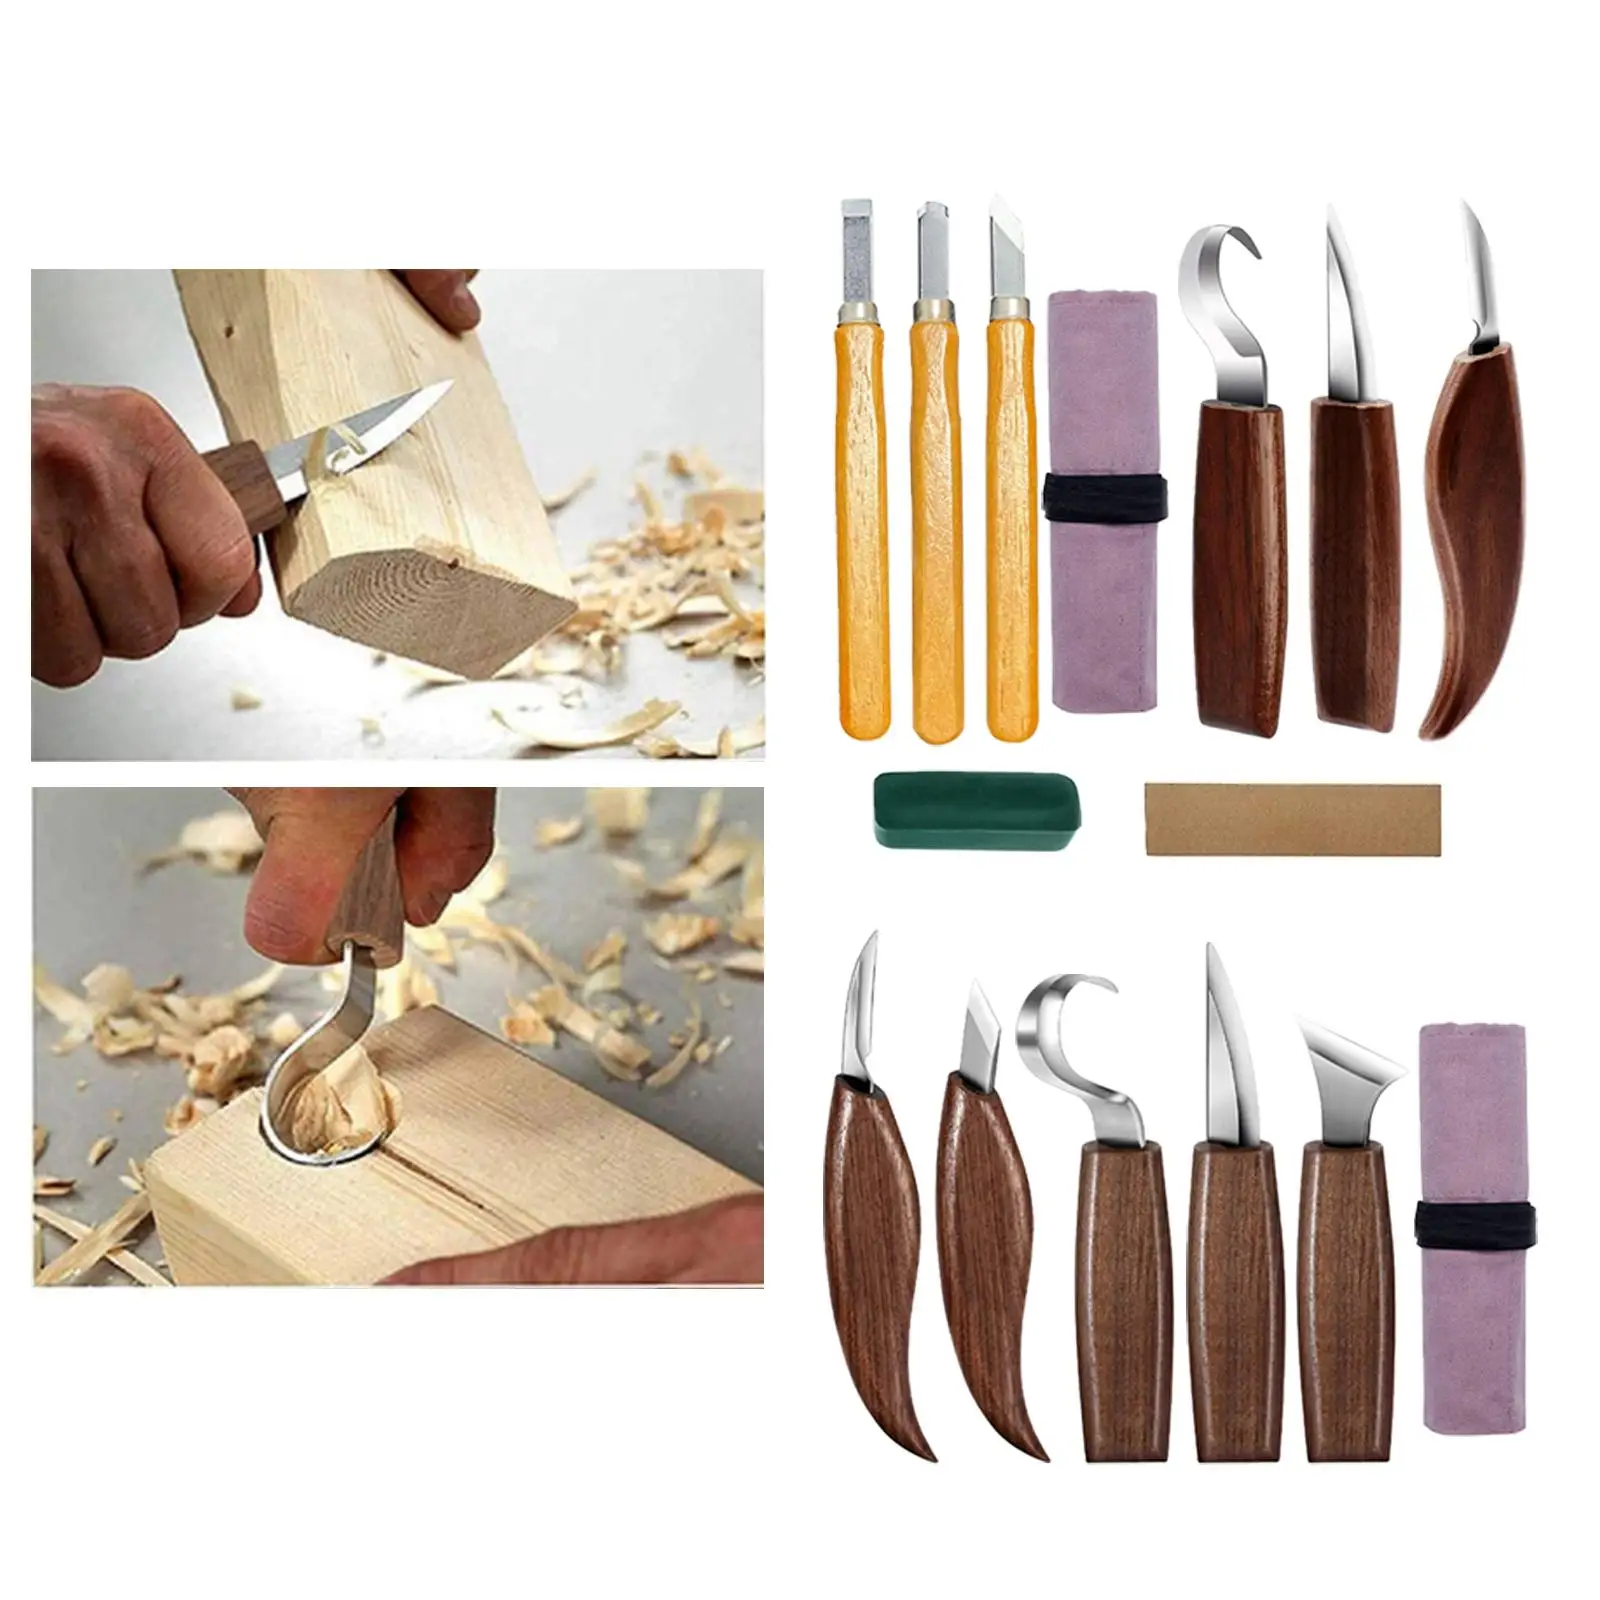 Professional Wood Carving Tools Set Woodworking Hand Tool Hook Carving Cutter DIY Crafts Detail Cutter Carpentry Adults Kids